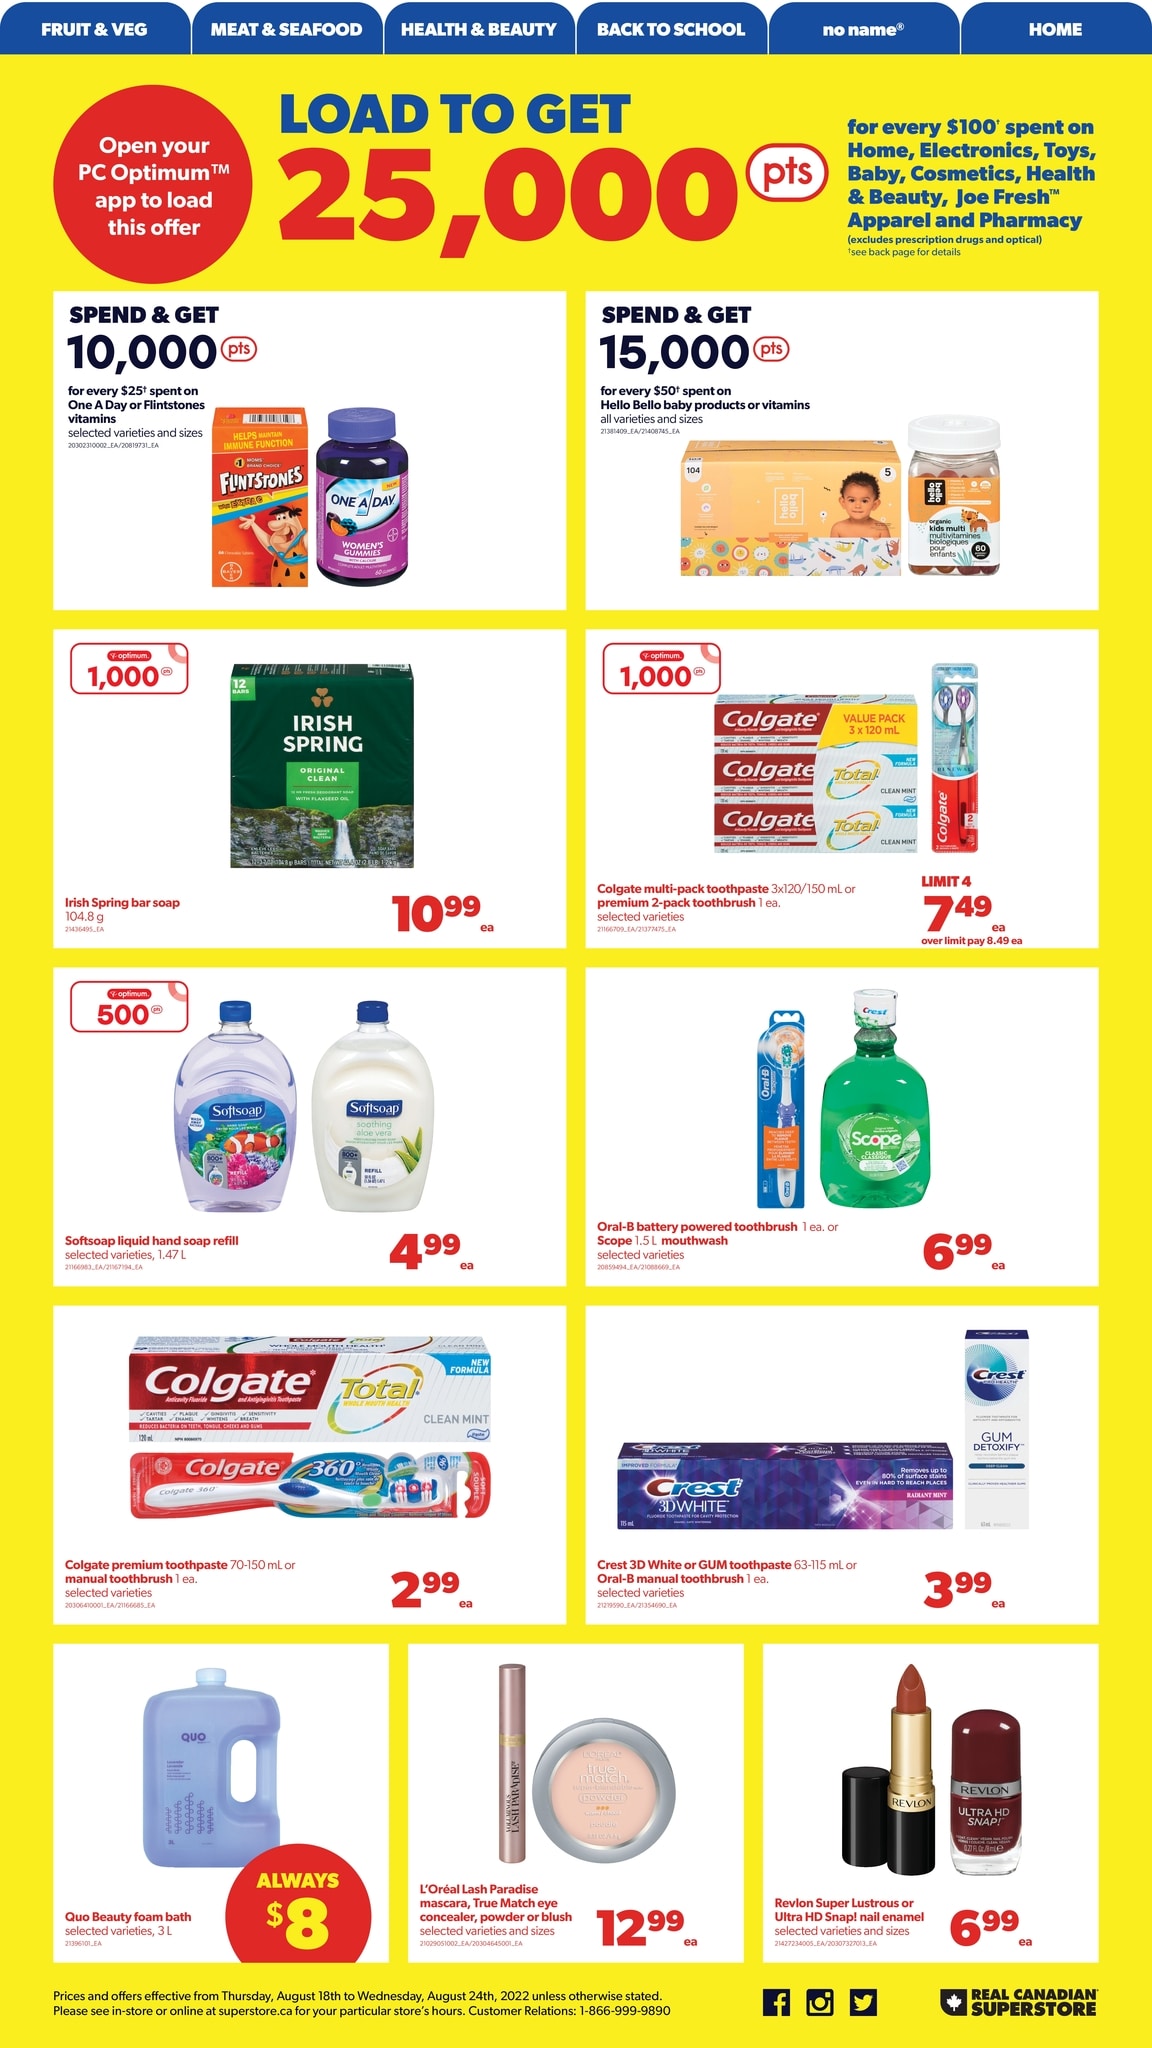 Real Canadian Superstore Western Canada - Weekly Flyer Specials - Page 21